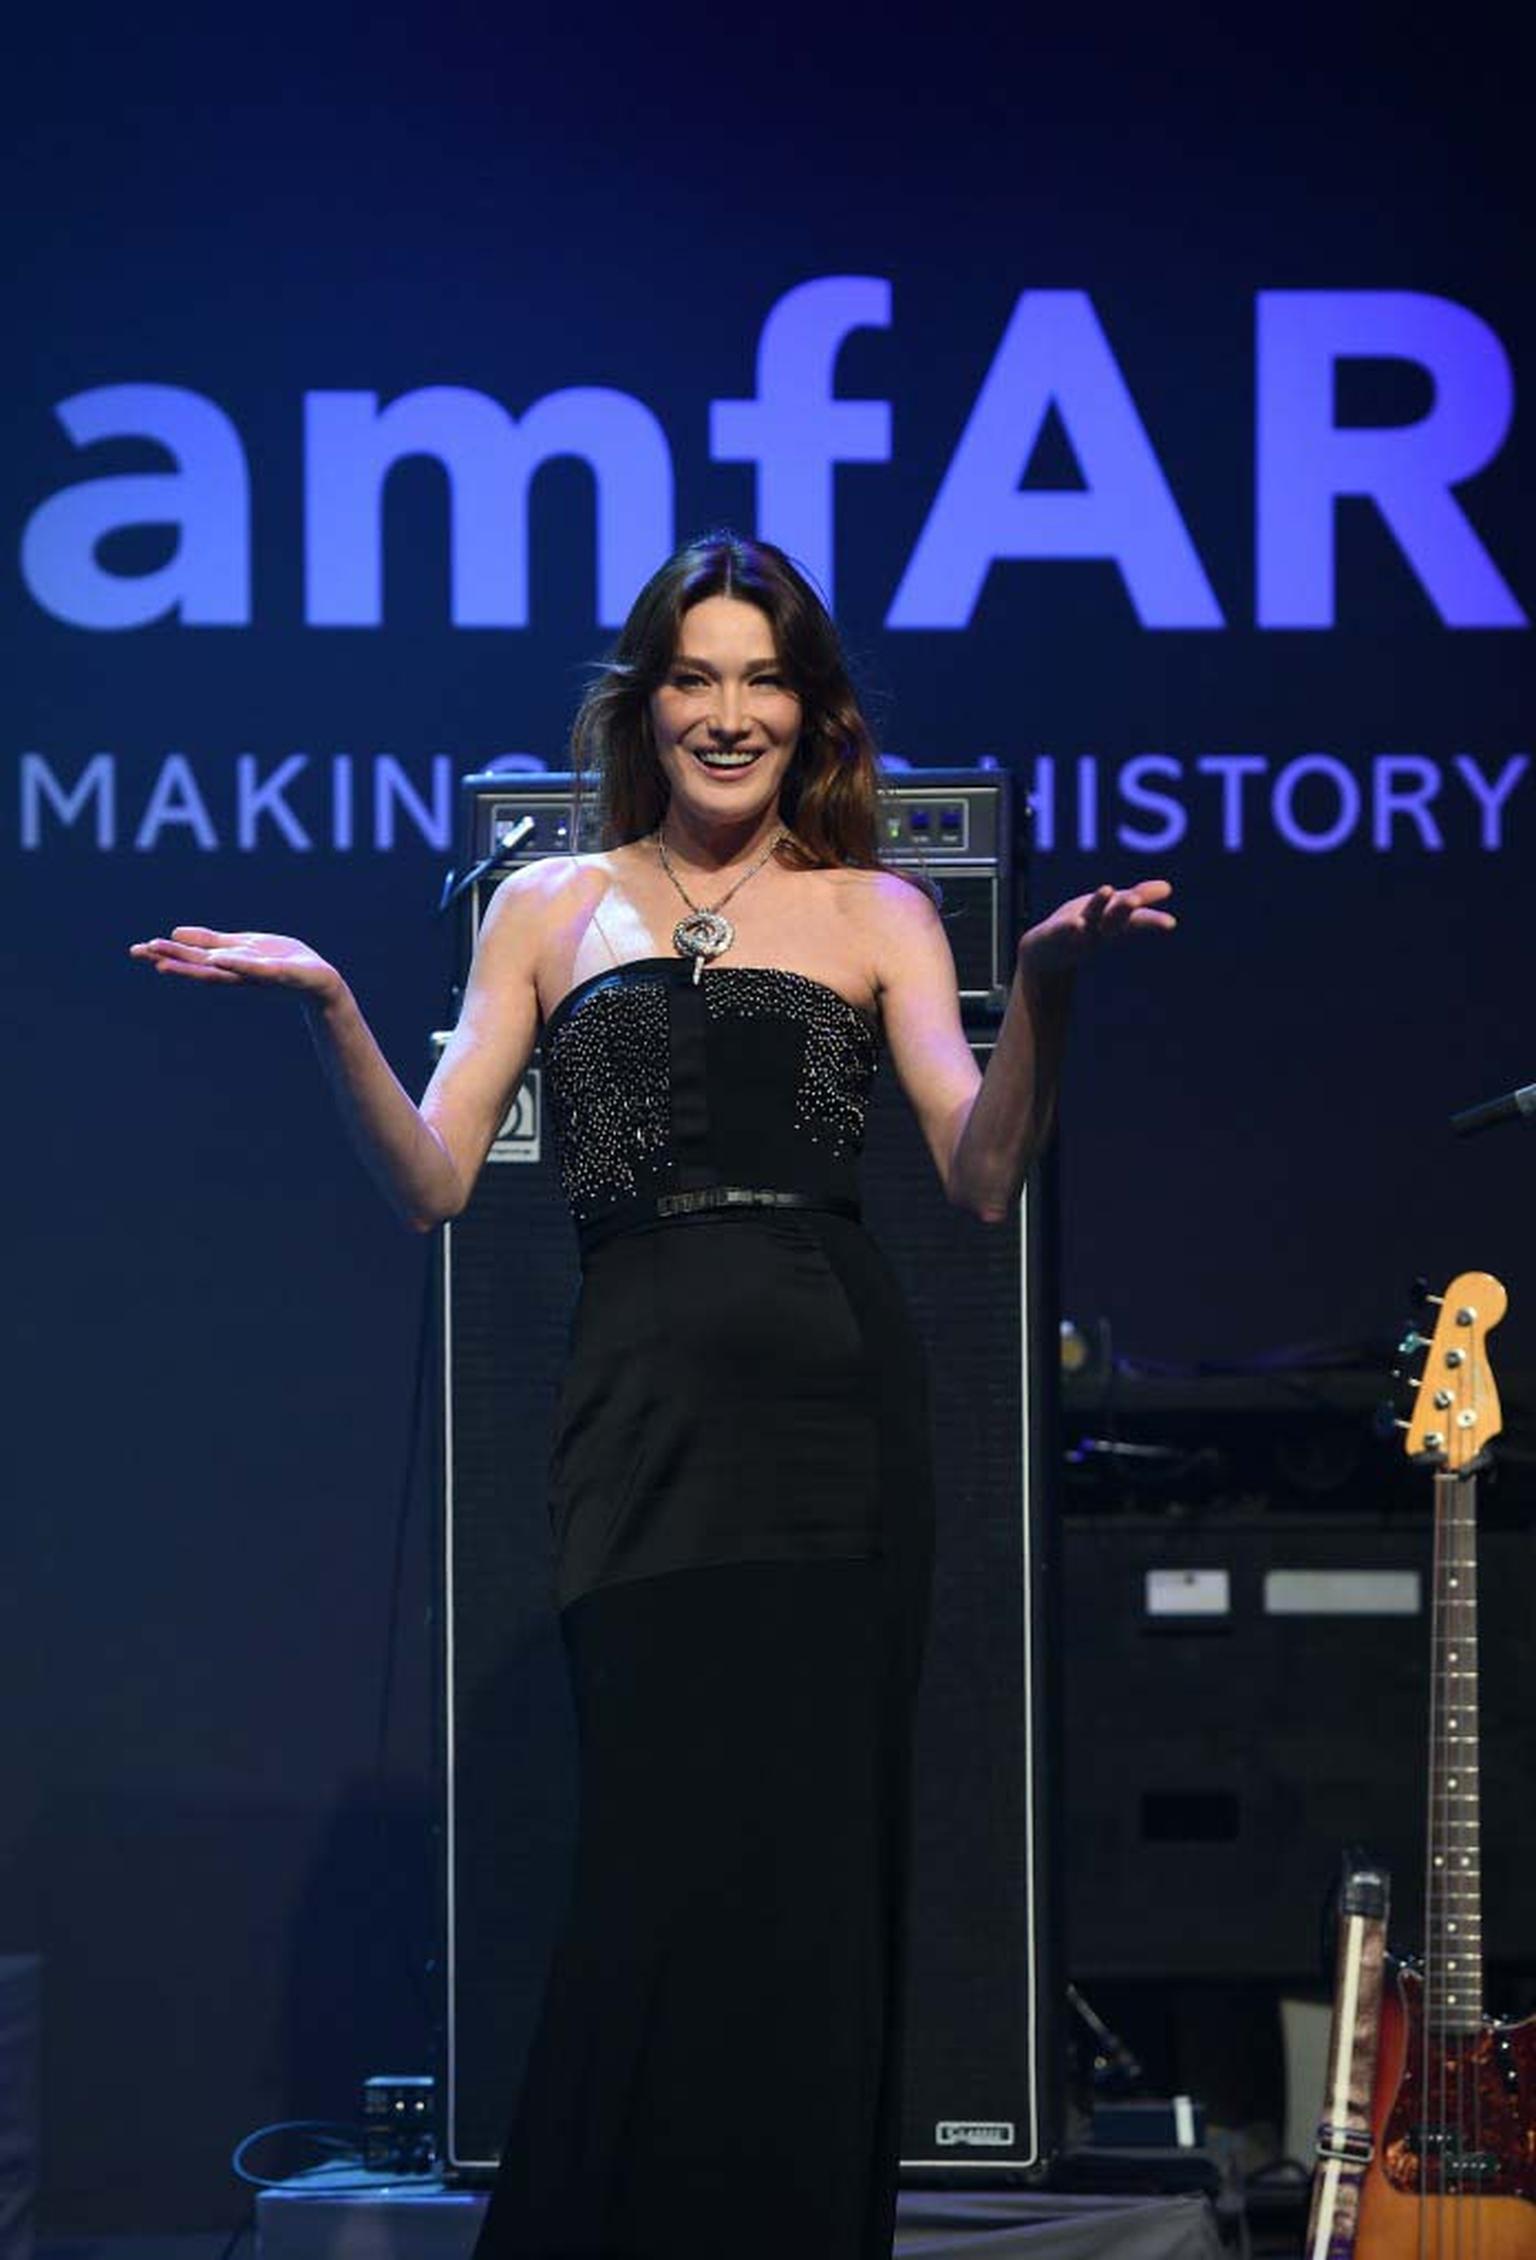 Bulgari ambassador and former first lady of France Carla Bruni-Sarkozy introduces the Bulgari Serpenti necklace that was auctioned for $546,000 during the amfAR Charity Gala in Cannes